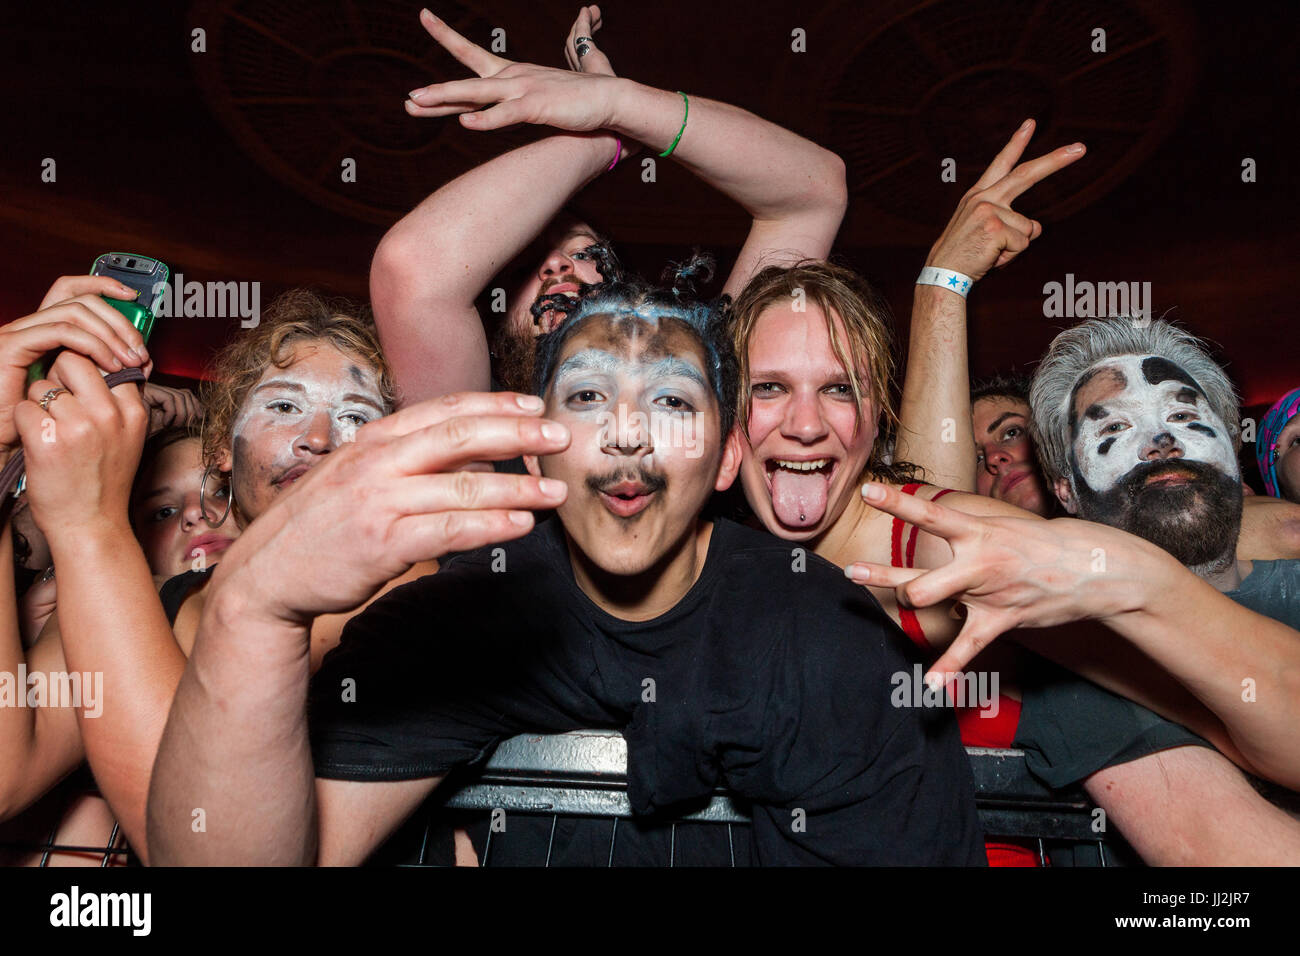 Juggalos (Insane Clown Posse fans) at an ICP concert at the Eagle/Rave club in Milwaukee, Wisconsin. Stock Photo